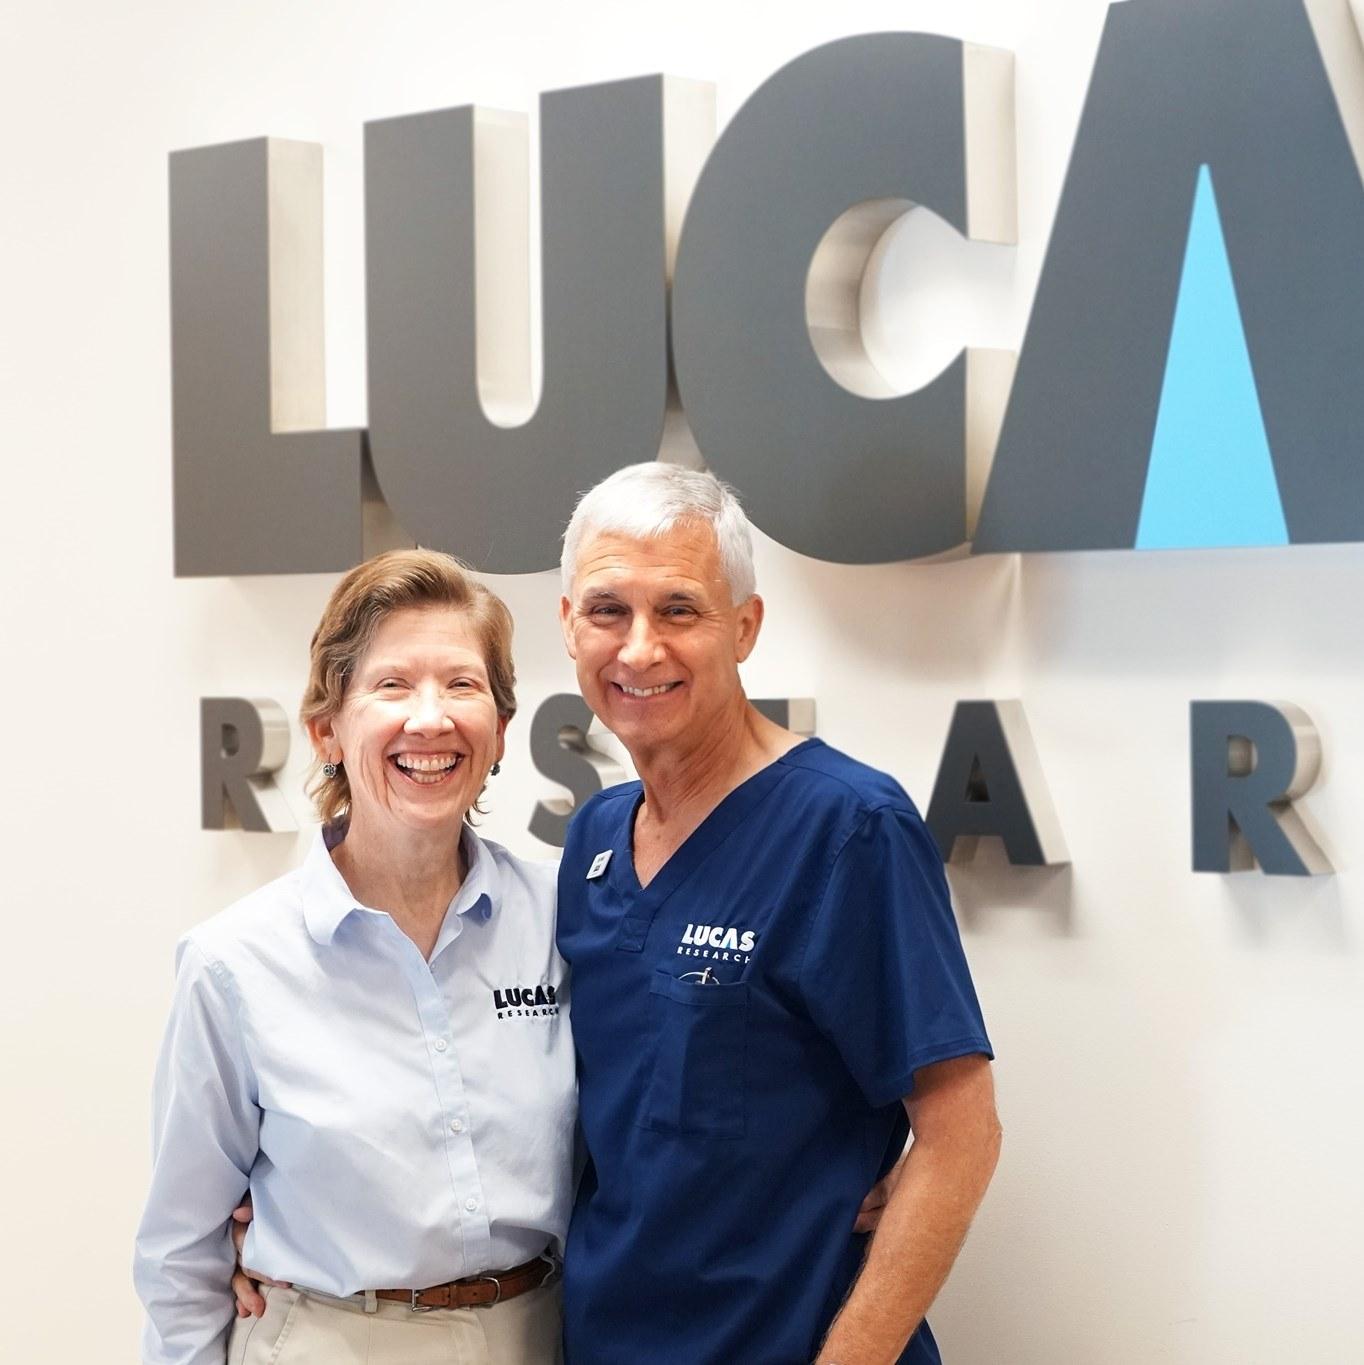 Lucas Research Founders Jeannie Lucas and Seth Medlin